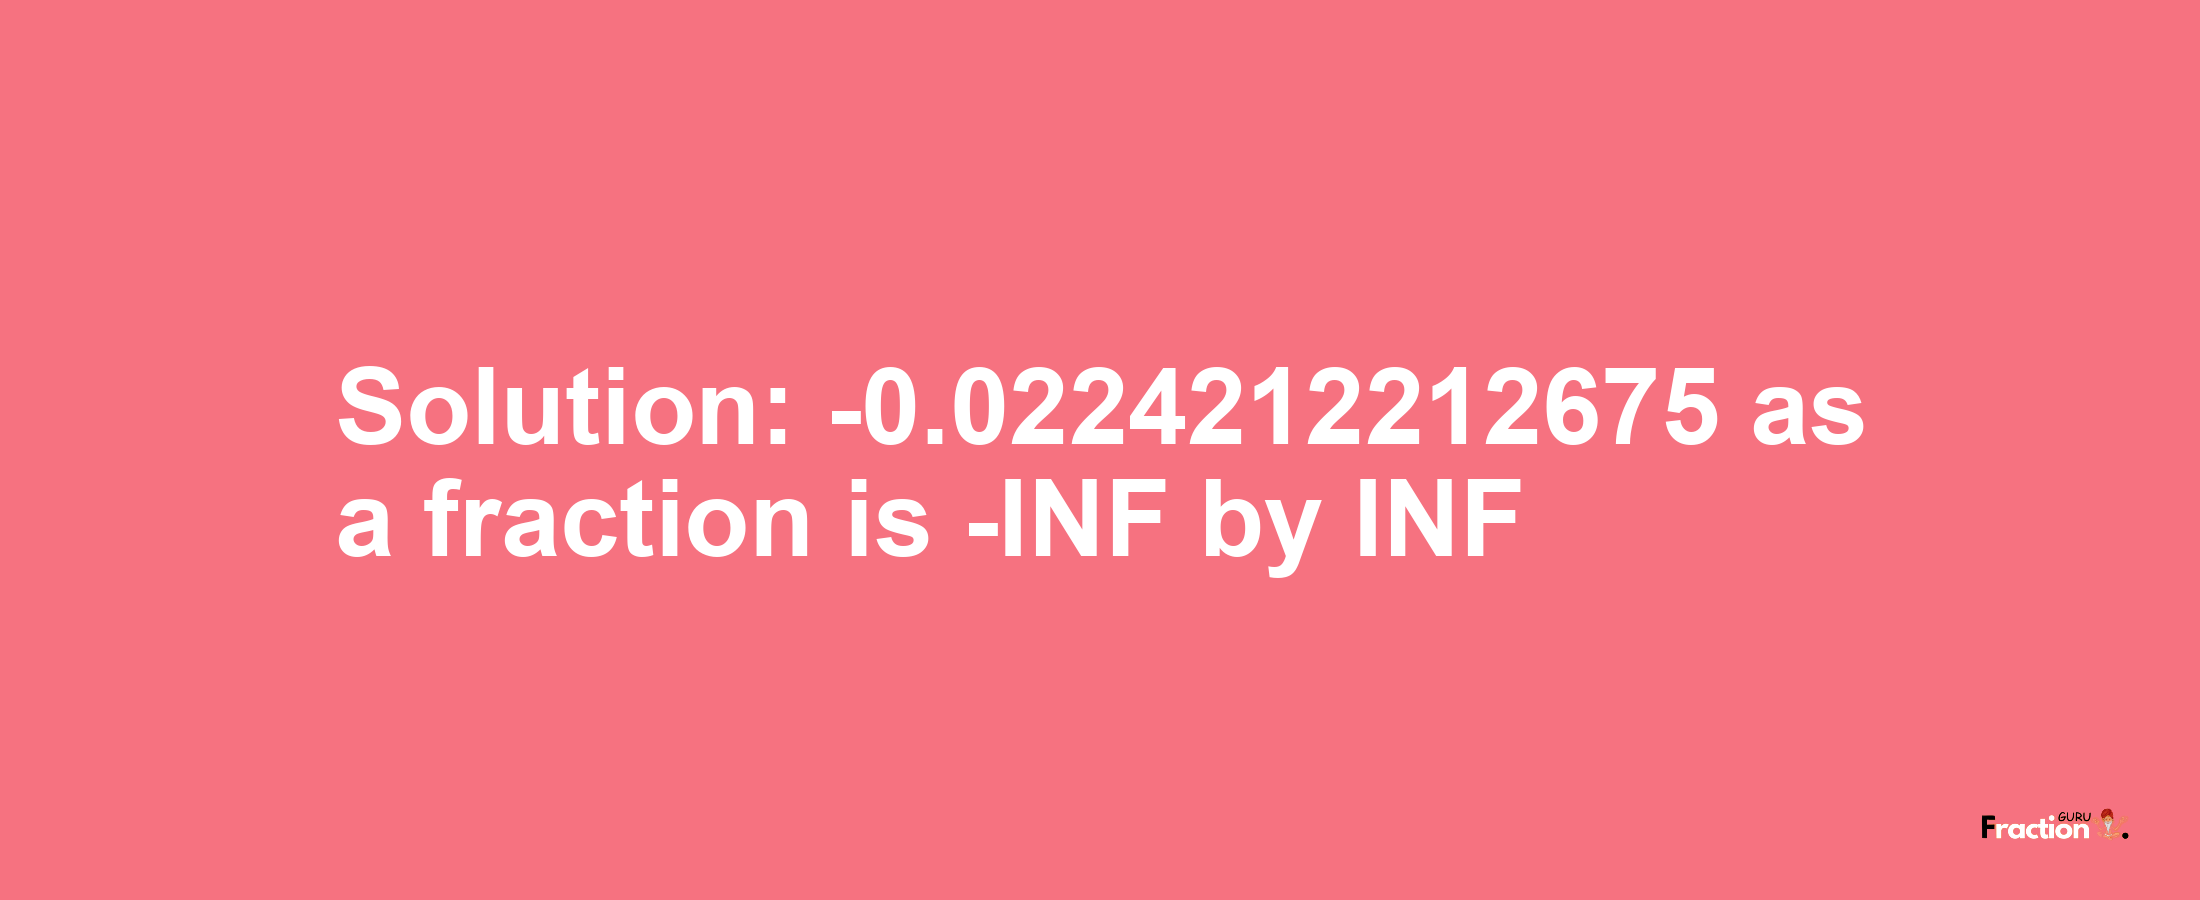 Solution:-0.0224212212675 as a fraction is -INF/INF